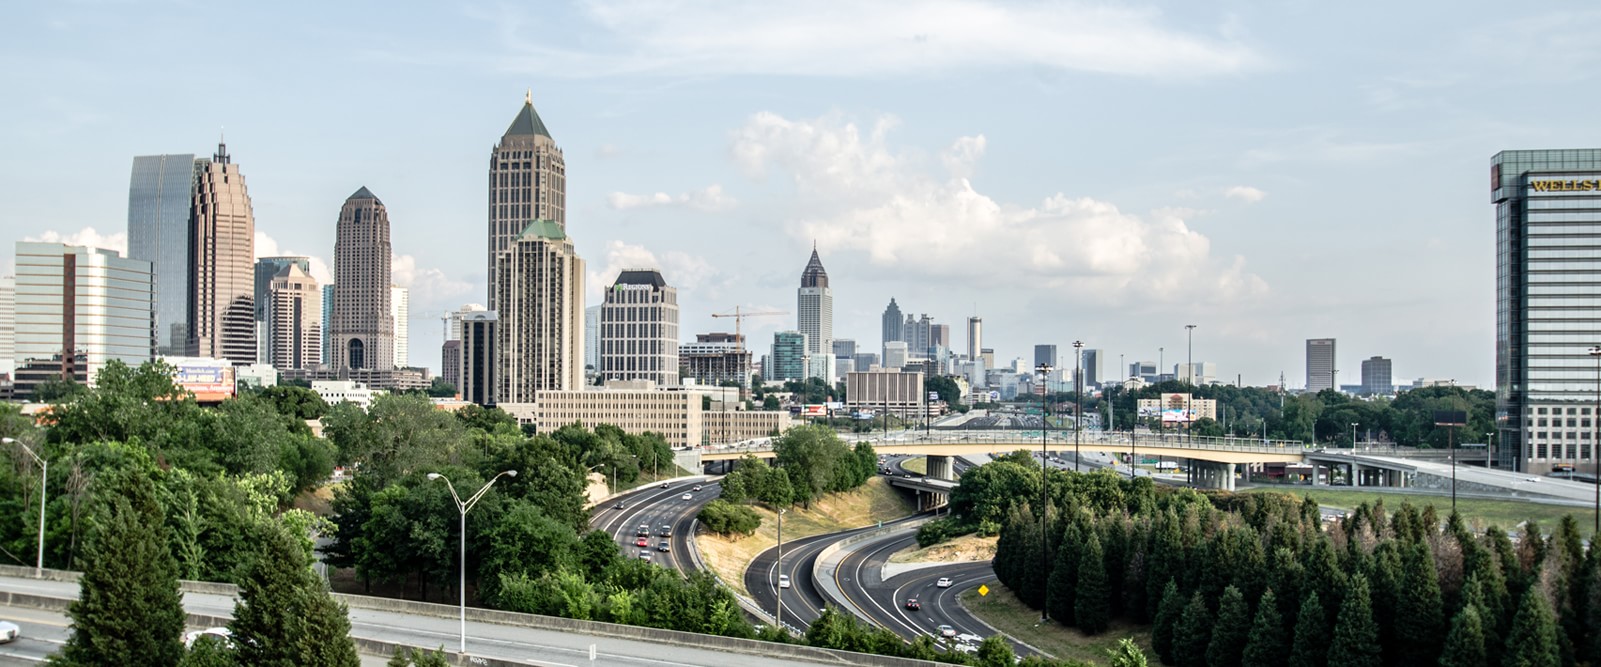 Skyline photo of Atlanta, Georgia - photo for About our tutoring company page